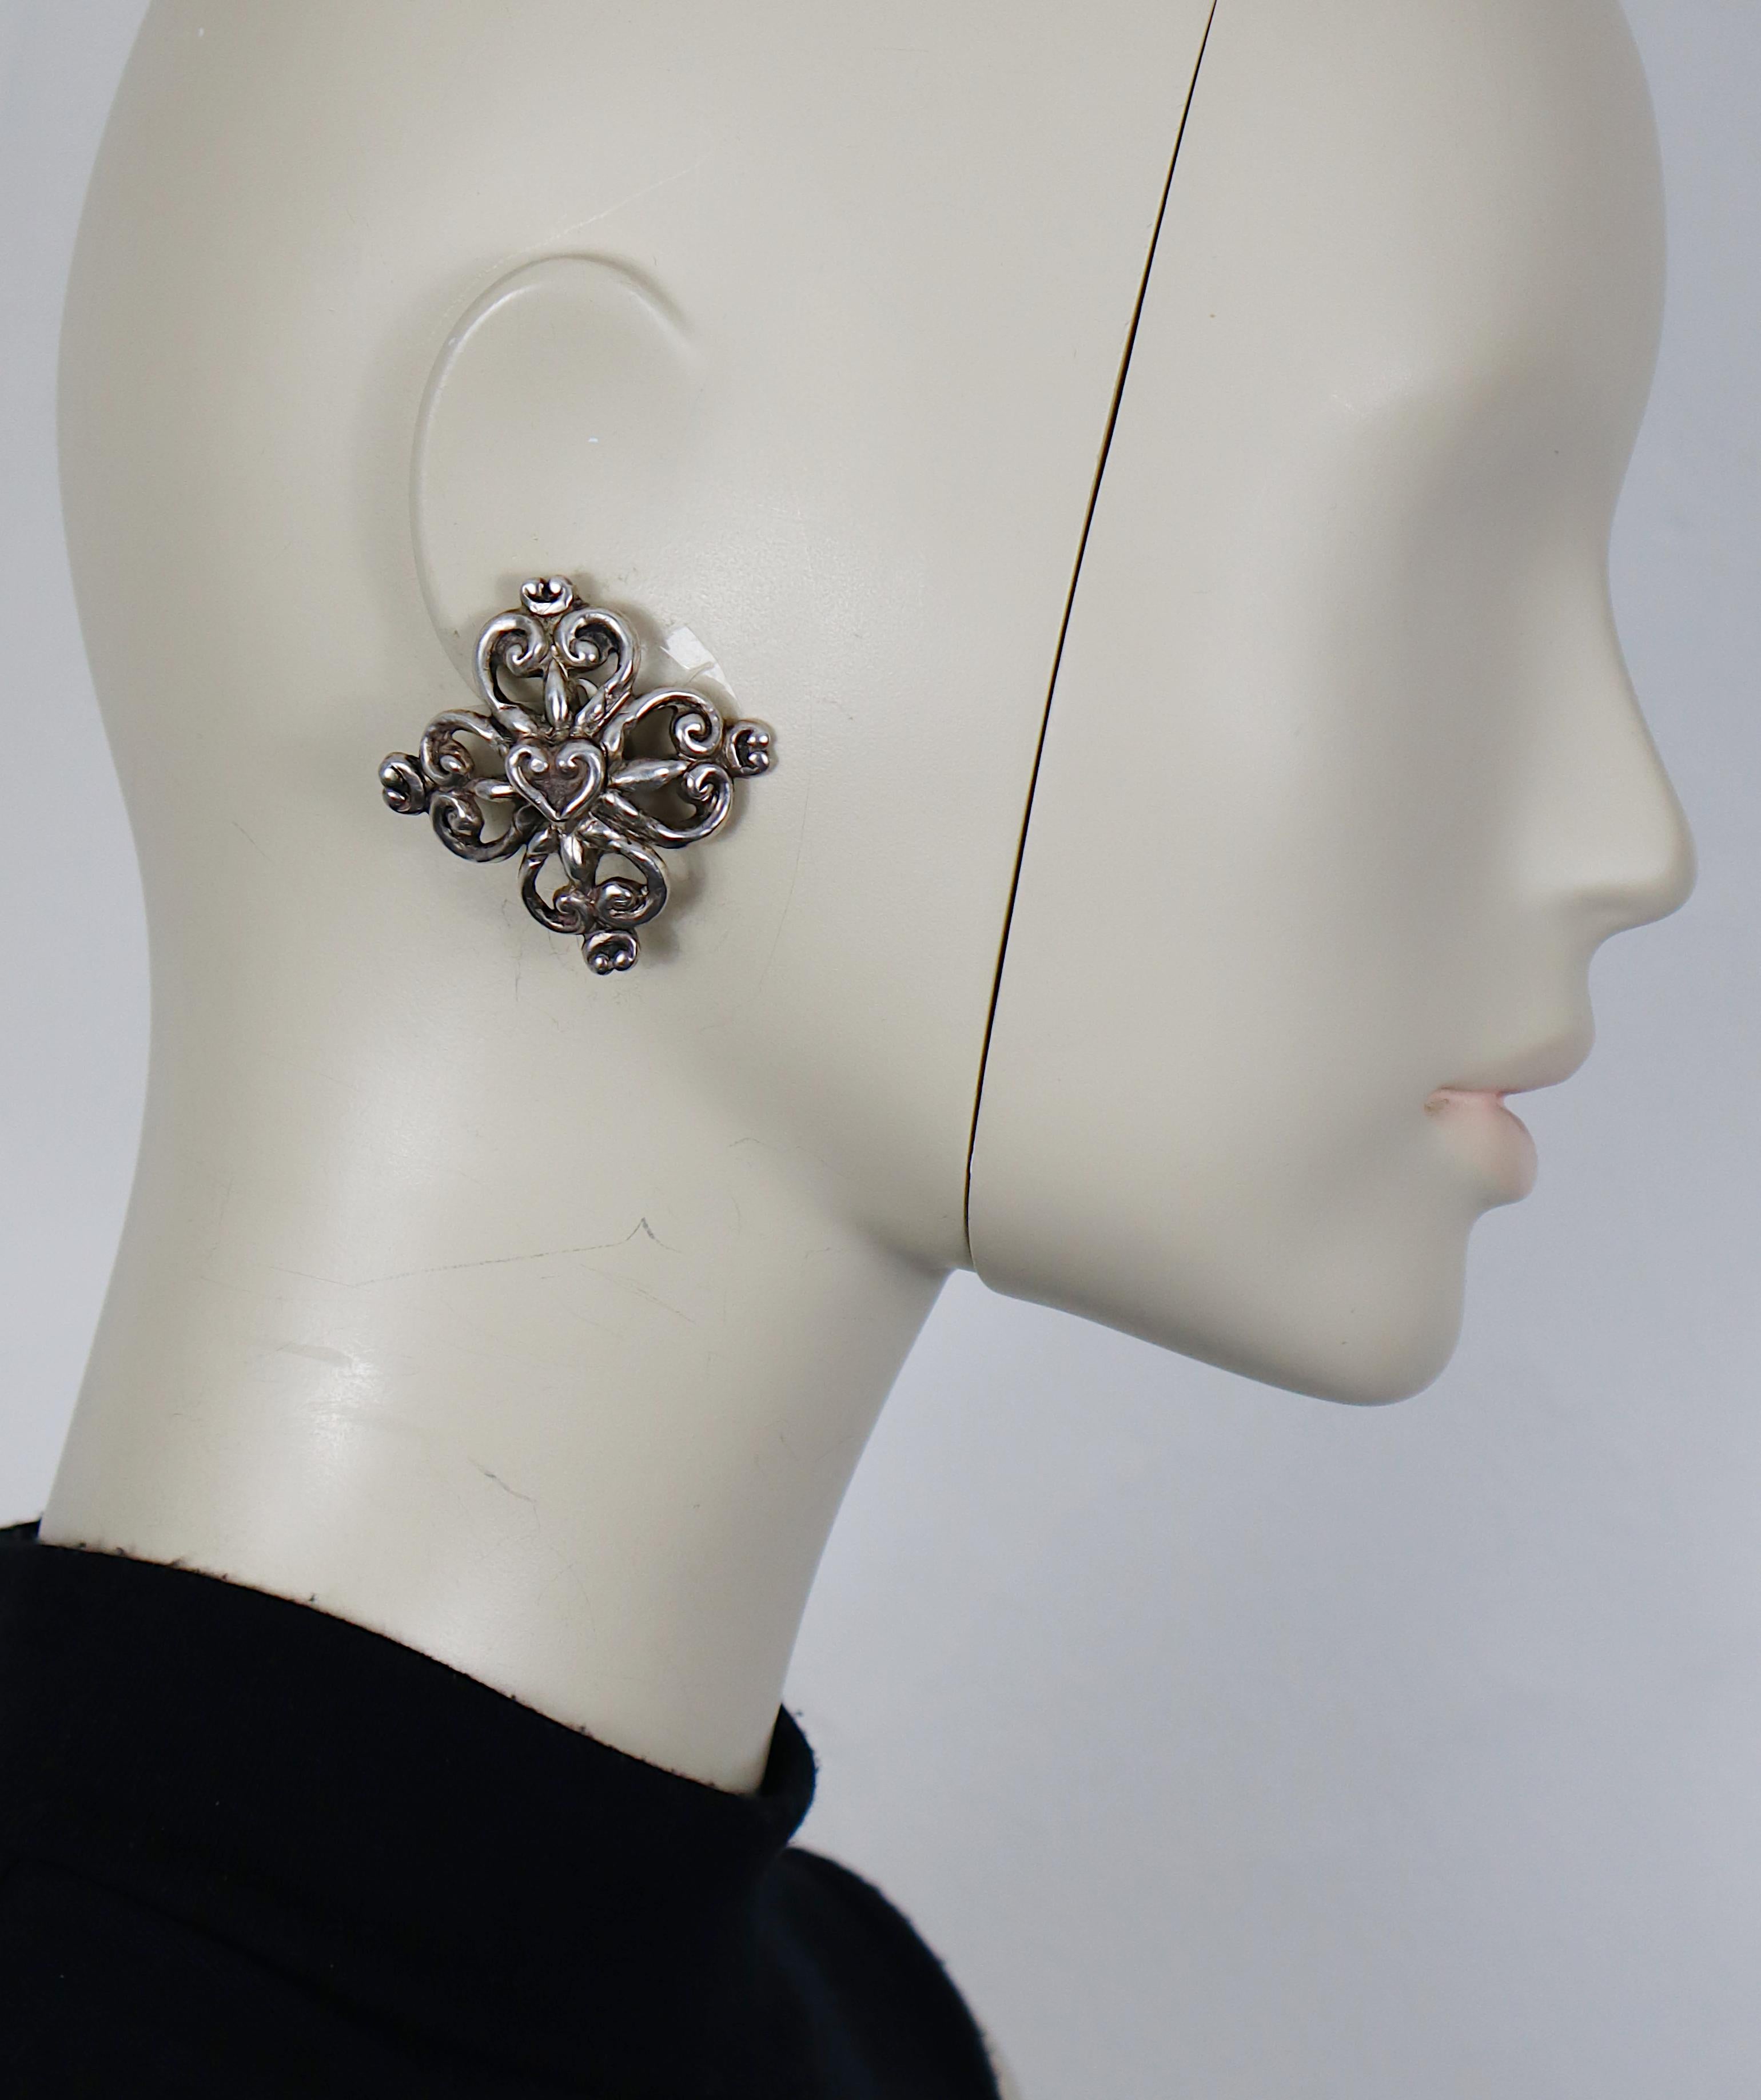 CHRISTIAN LACROIX vintage antiqued silver tone clip-on earrings featuring scroll hearts.

Embossed CHRISTIAN LACROIX E94 Made in France.

Indicative measurements : approx. 4.5 cm x 4.5 cm (1.77 inches x 1.77 inches).

Weight per earring : approx. 16